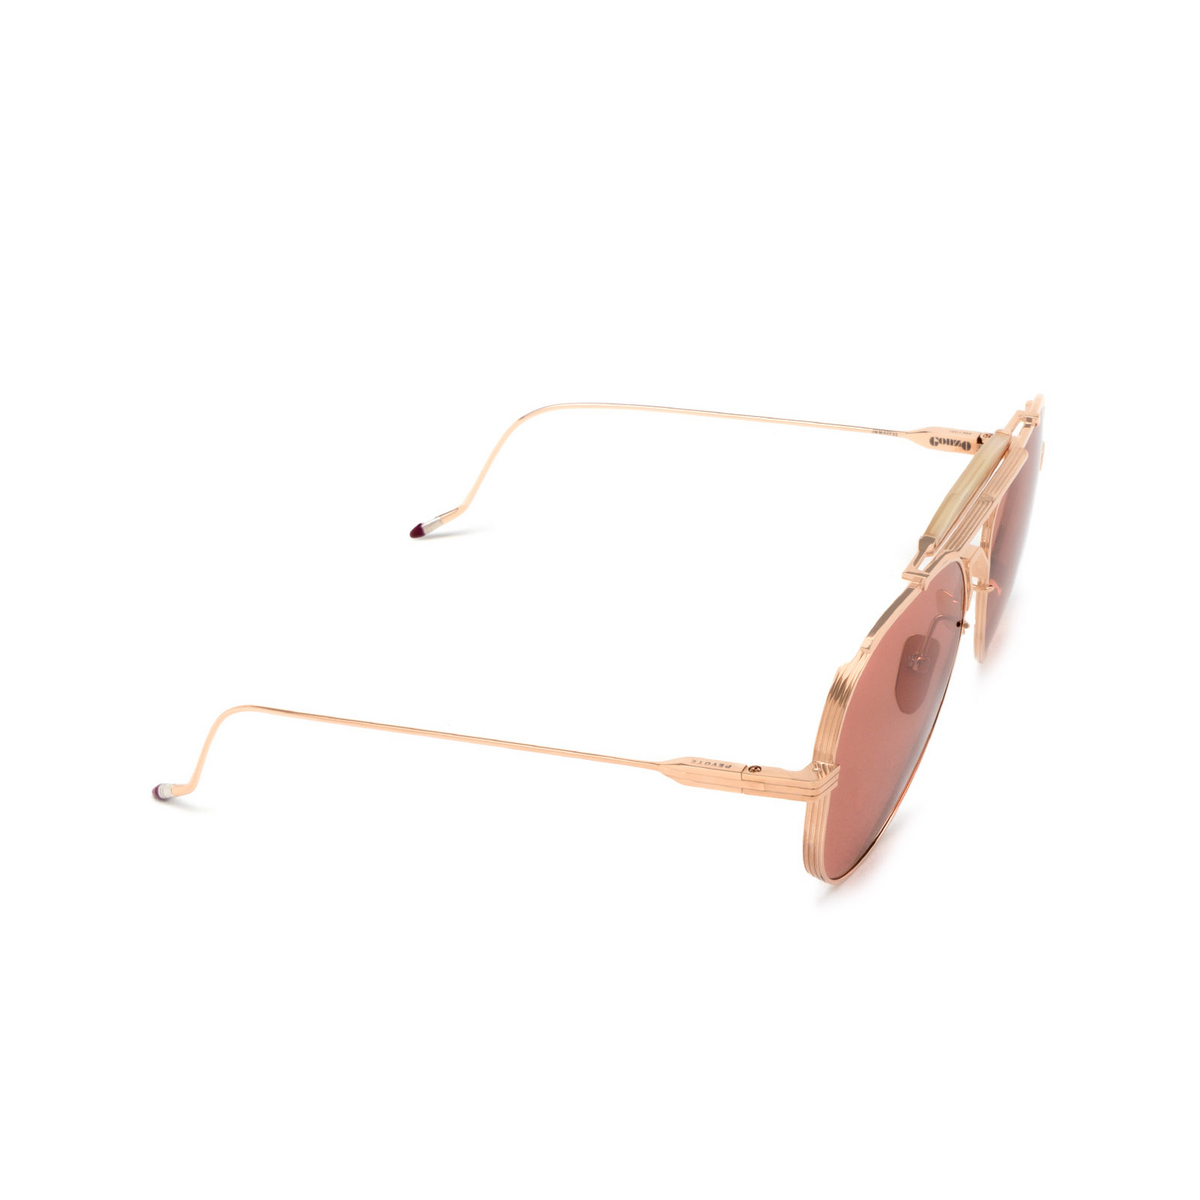 Jacques Marie Mage GONZO PEYOTE 2 Sunglasses ROSE GOLD - three-quarters view